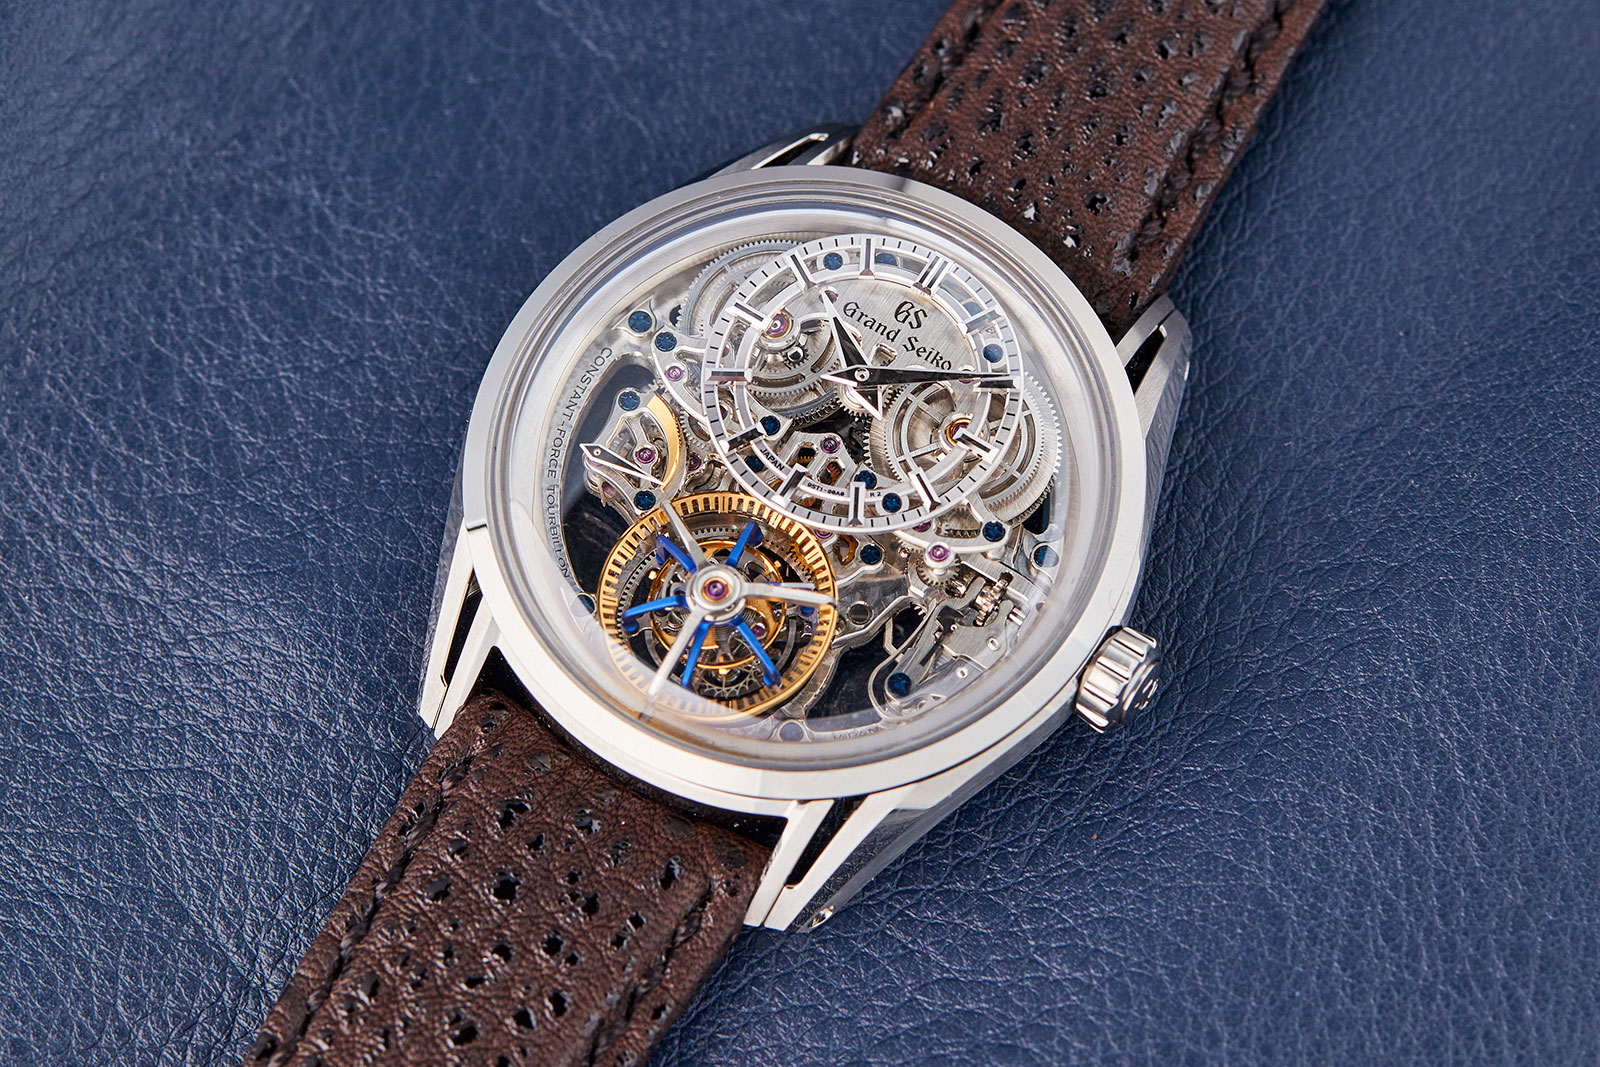 Auction Watch: The Unique Grand Seiko Kodo Constant-Force | Watches